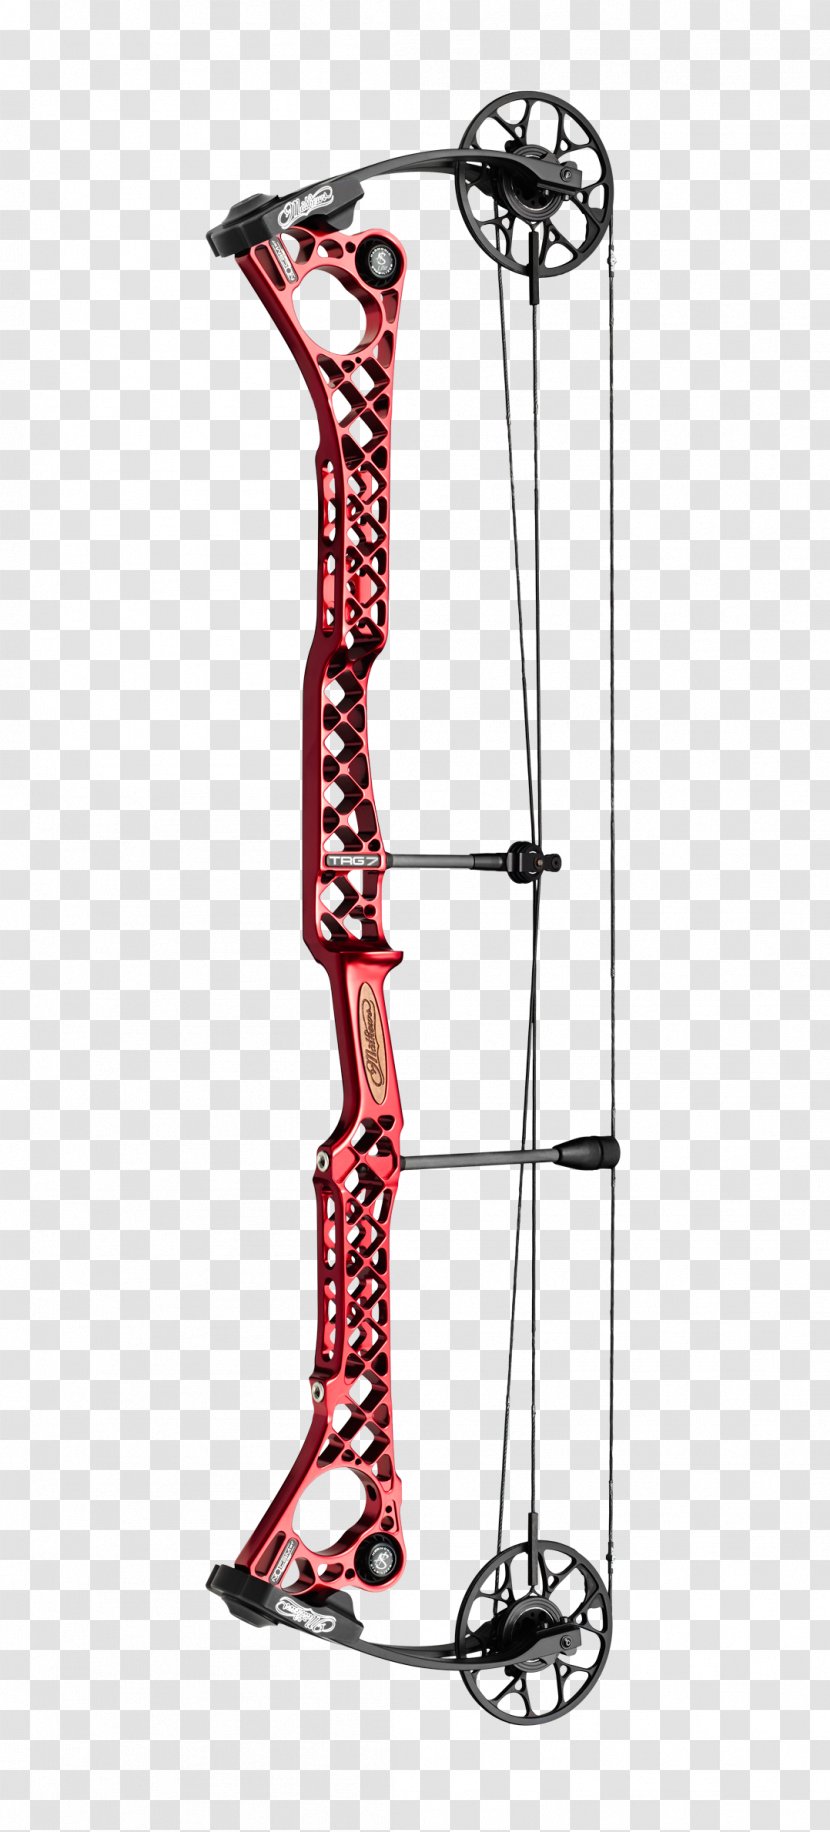 Bow And Arrow Compound Bows Archery Hunting Binary Cam - 2014 Equipment Transparent PNG